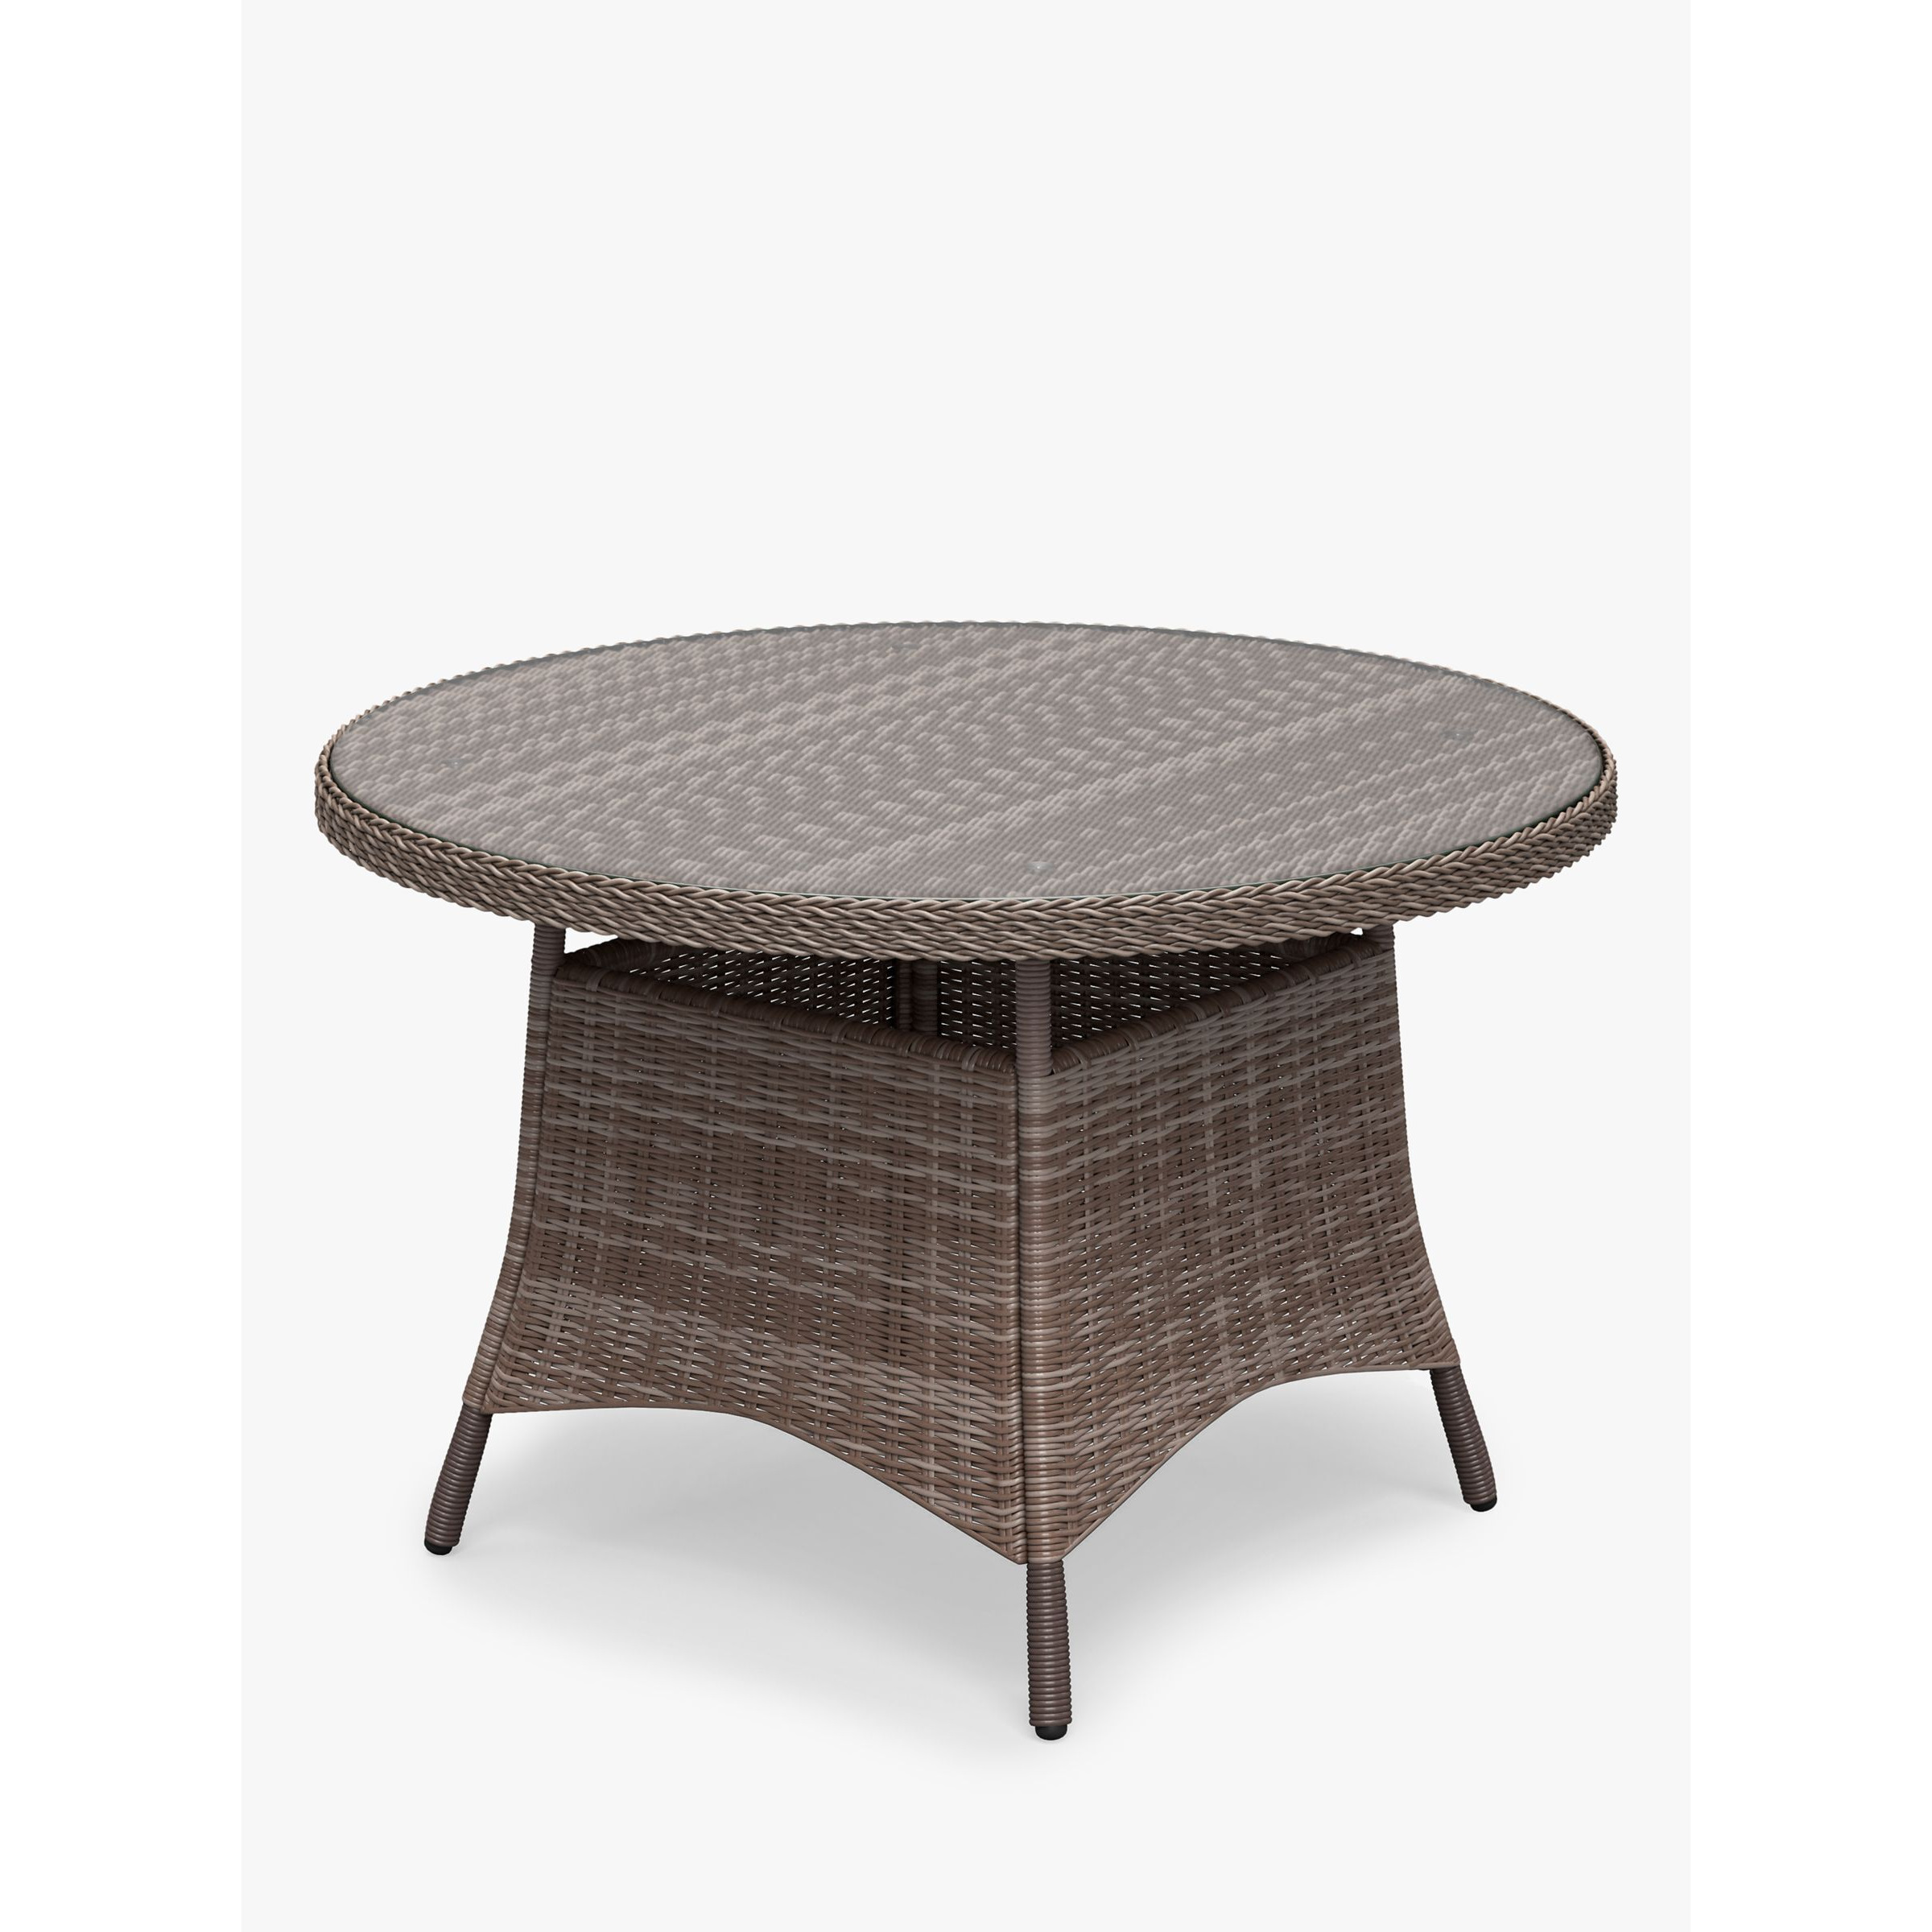 John Lewis Rye Woven 4-Seater Round Garden Dining Table, Natural - image 1